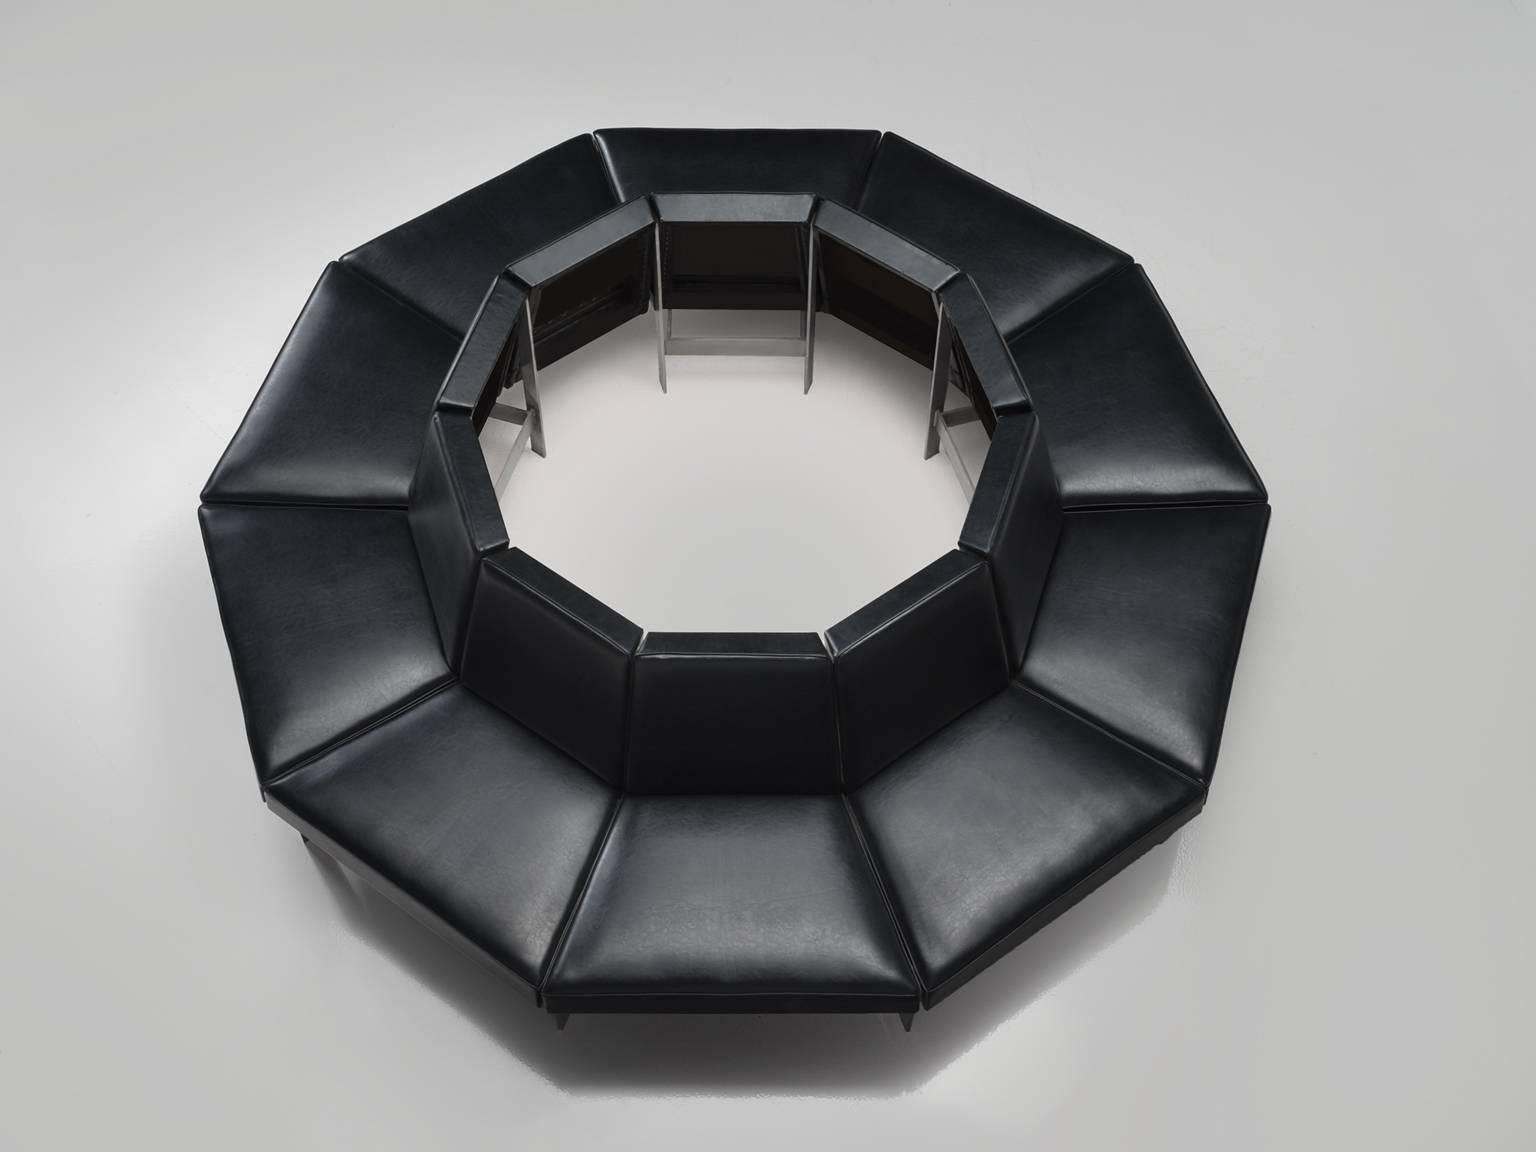 Sofa, black faux leather, steel, Europe, 1960s

This set of ten faux leather sectional benches with metal frame together form semicircle. The seat is executed with soft leatherette that is smoothly upholstered. The construction is geometric, solid